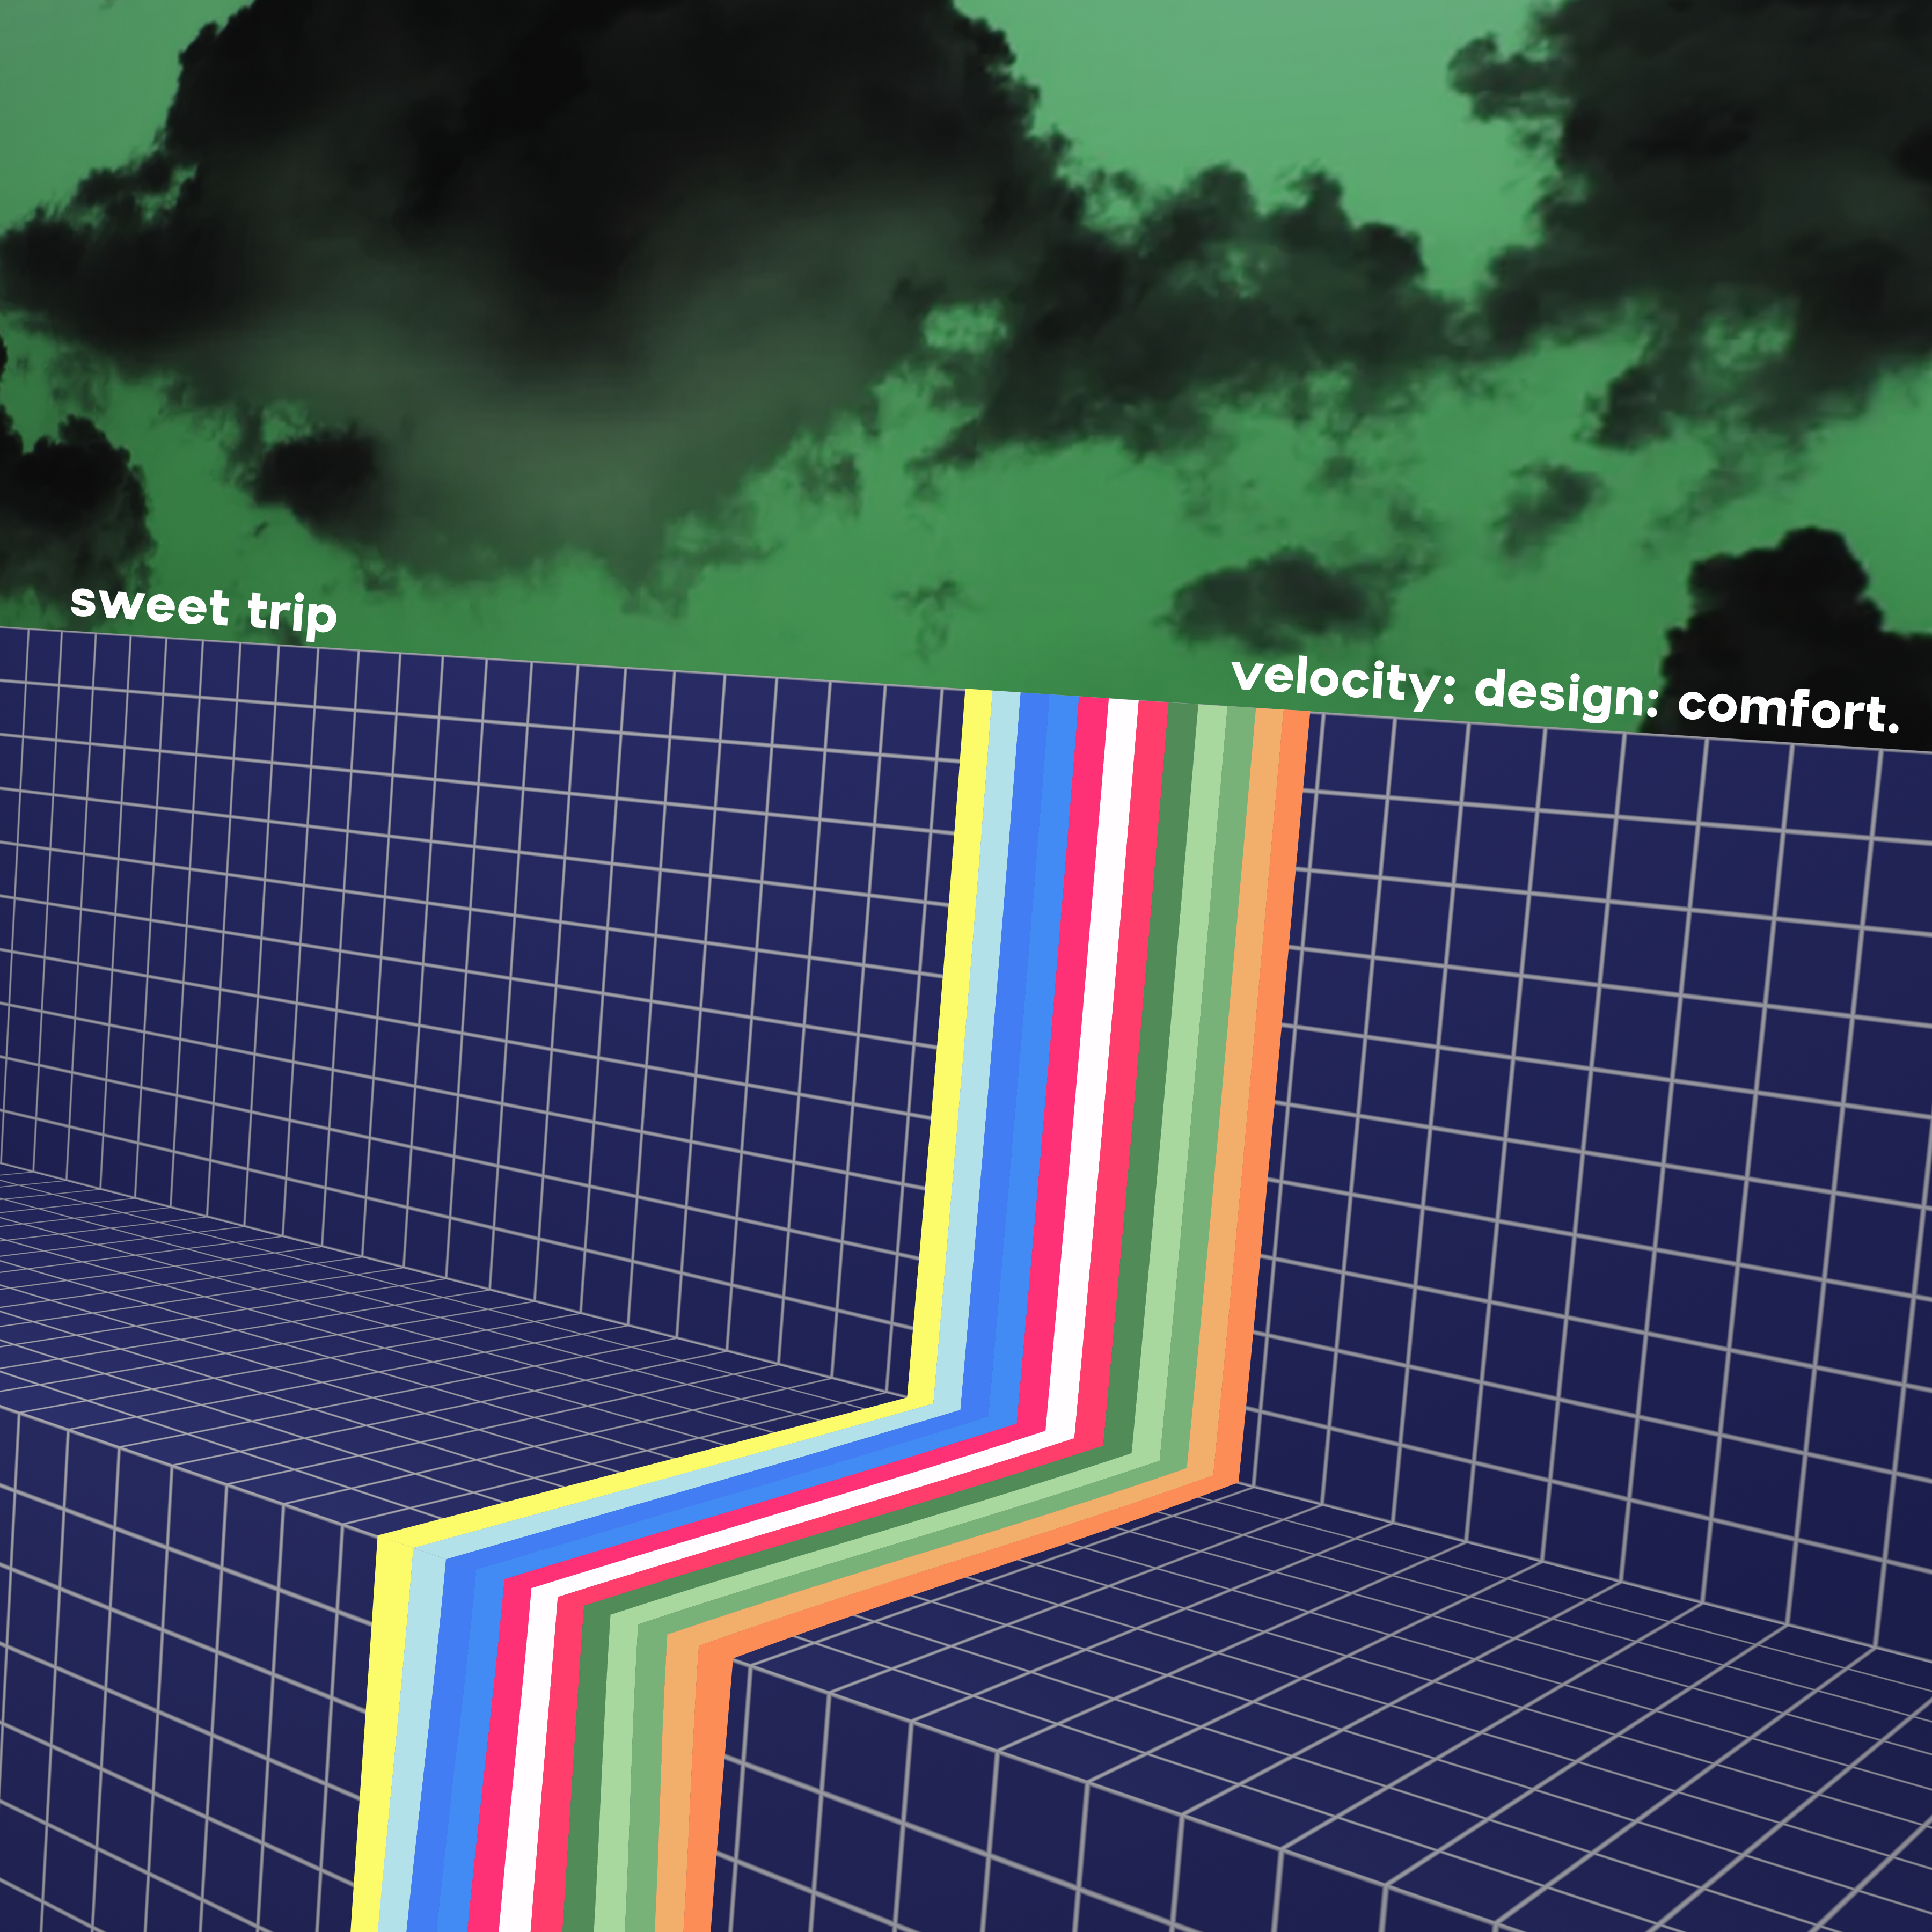 The finished front cover of the album. It has a nice waterfall ribbon thing of cover flowing down the flat grid covered planes. On the horizon is the title of the album and the name of the band. The background is a green sky with black clouds.